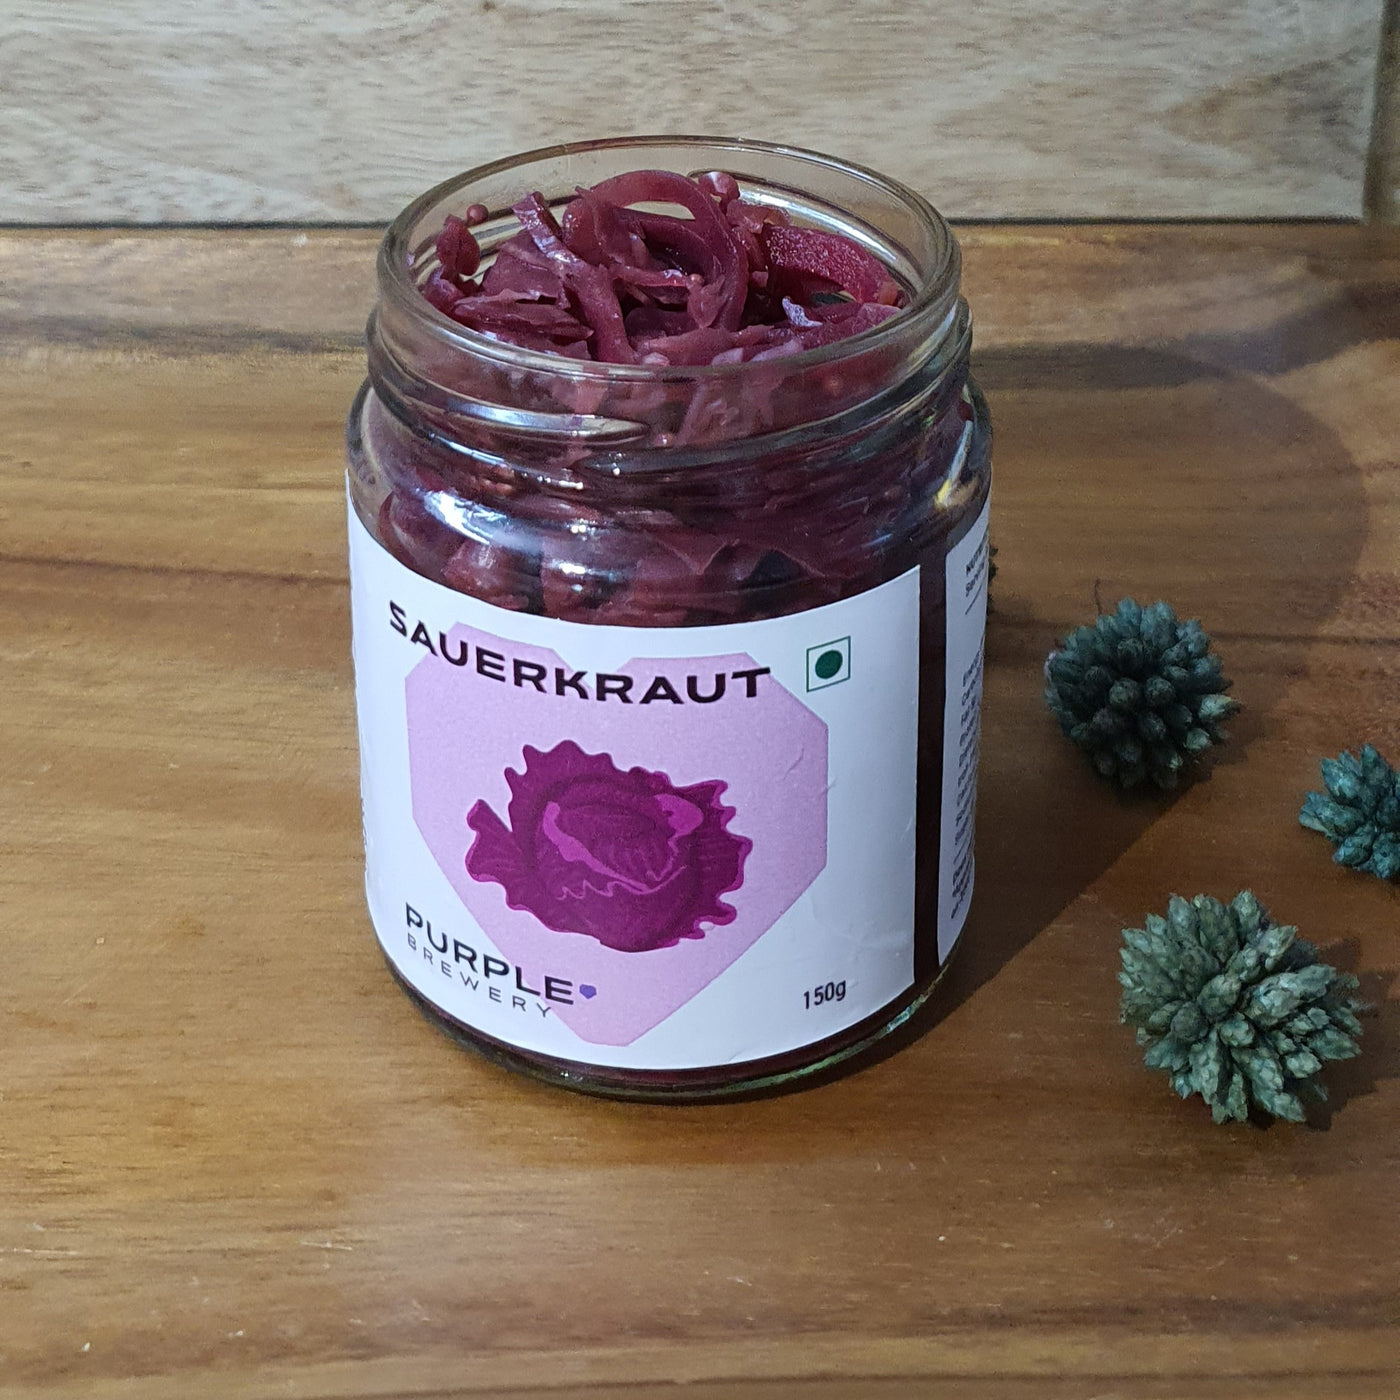 Sauerkraut, or fermented cabbage, is loaded with vitamins C and K, iron & fibre and naturally contains healthy gut bacteria called Probiotics.